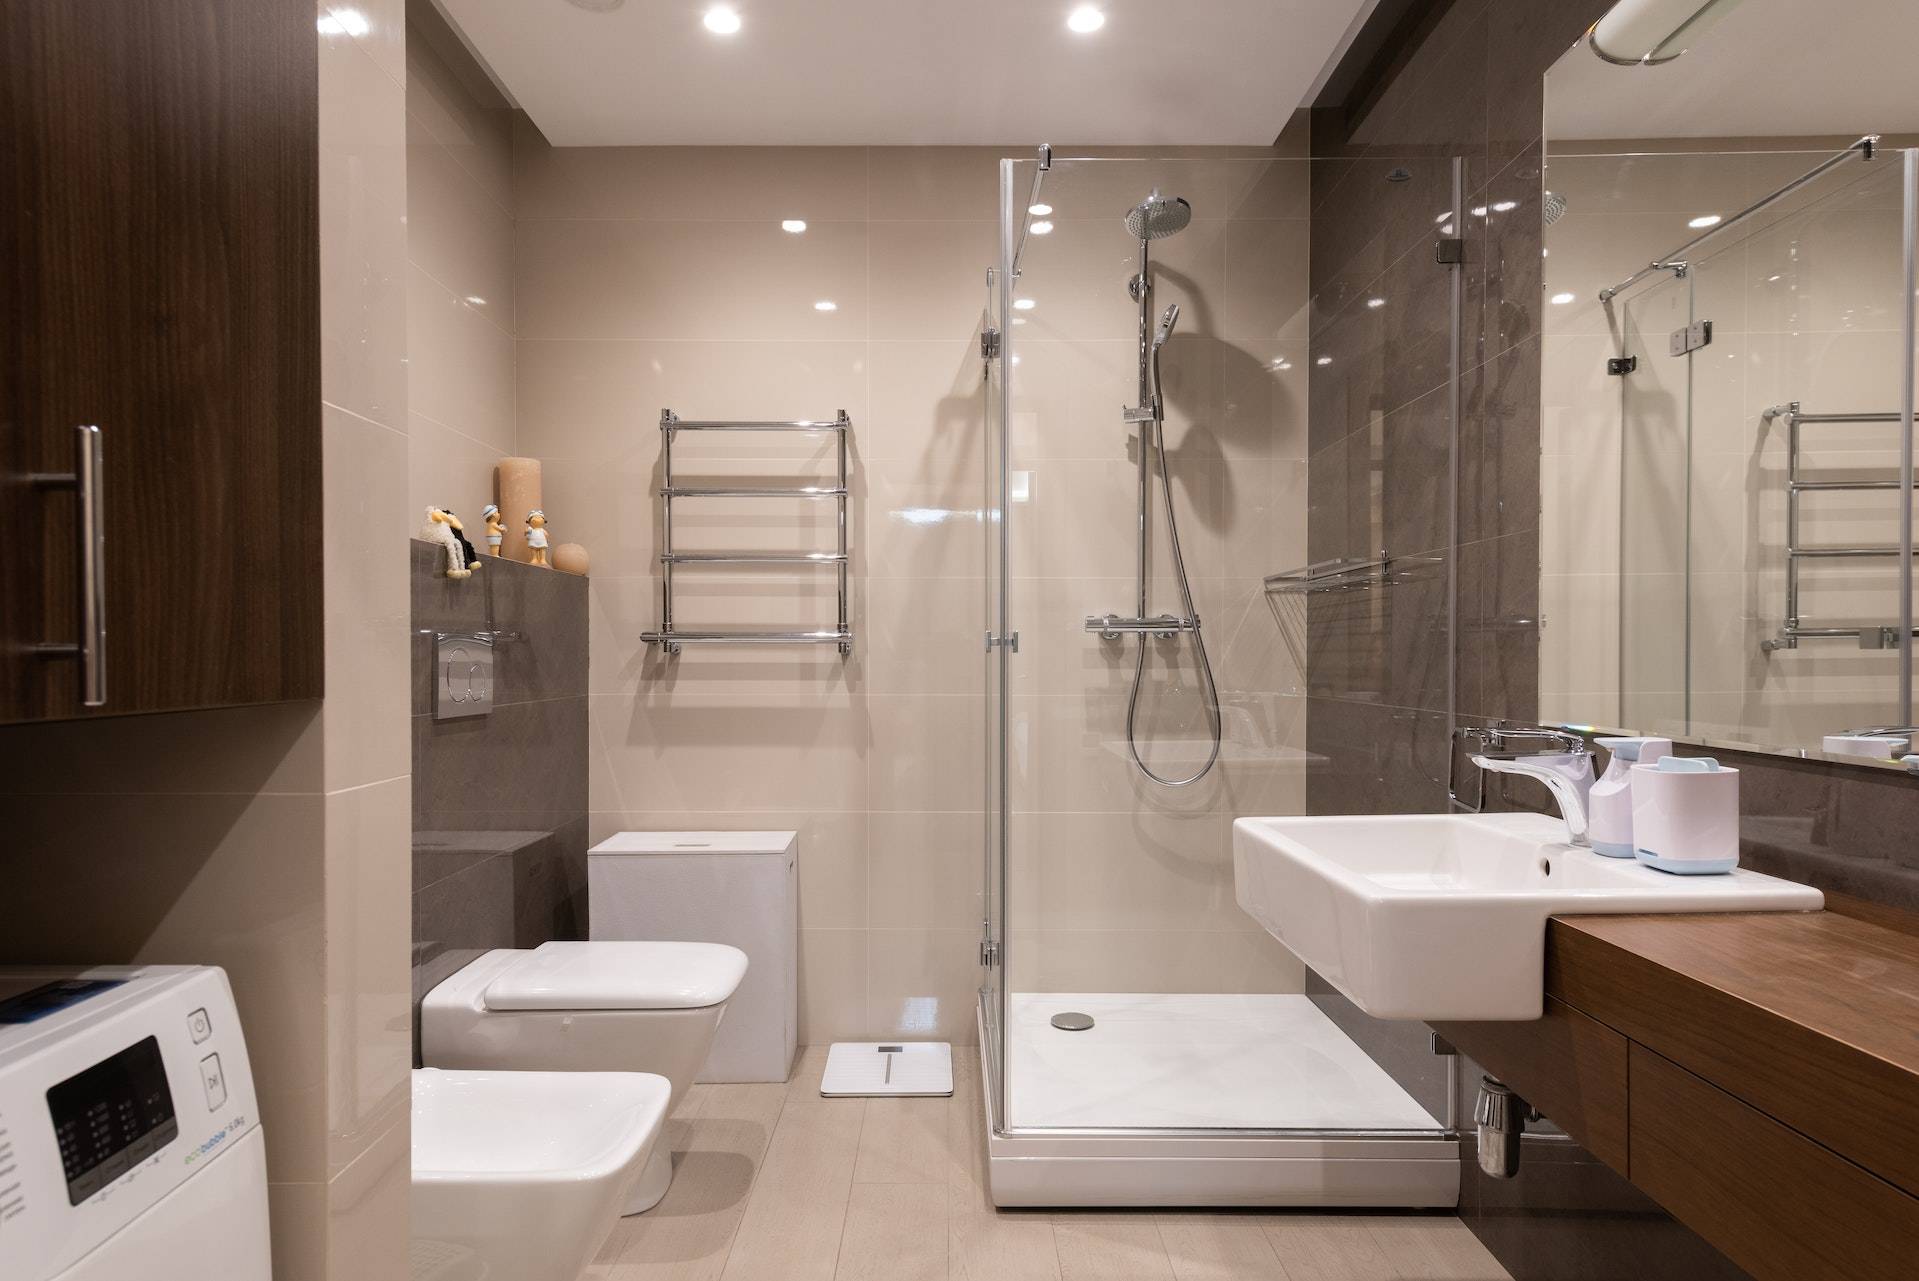 Best Practices For Maintaining A Fiberglass Shower